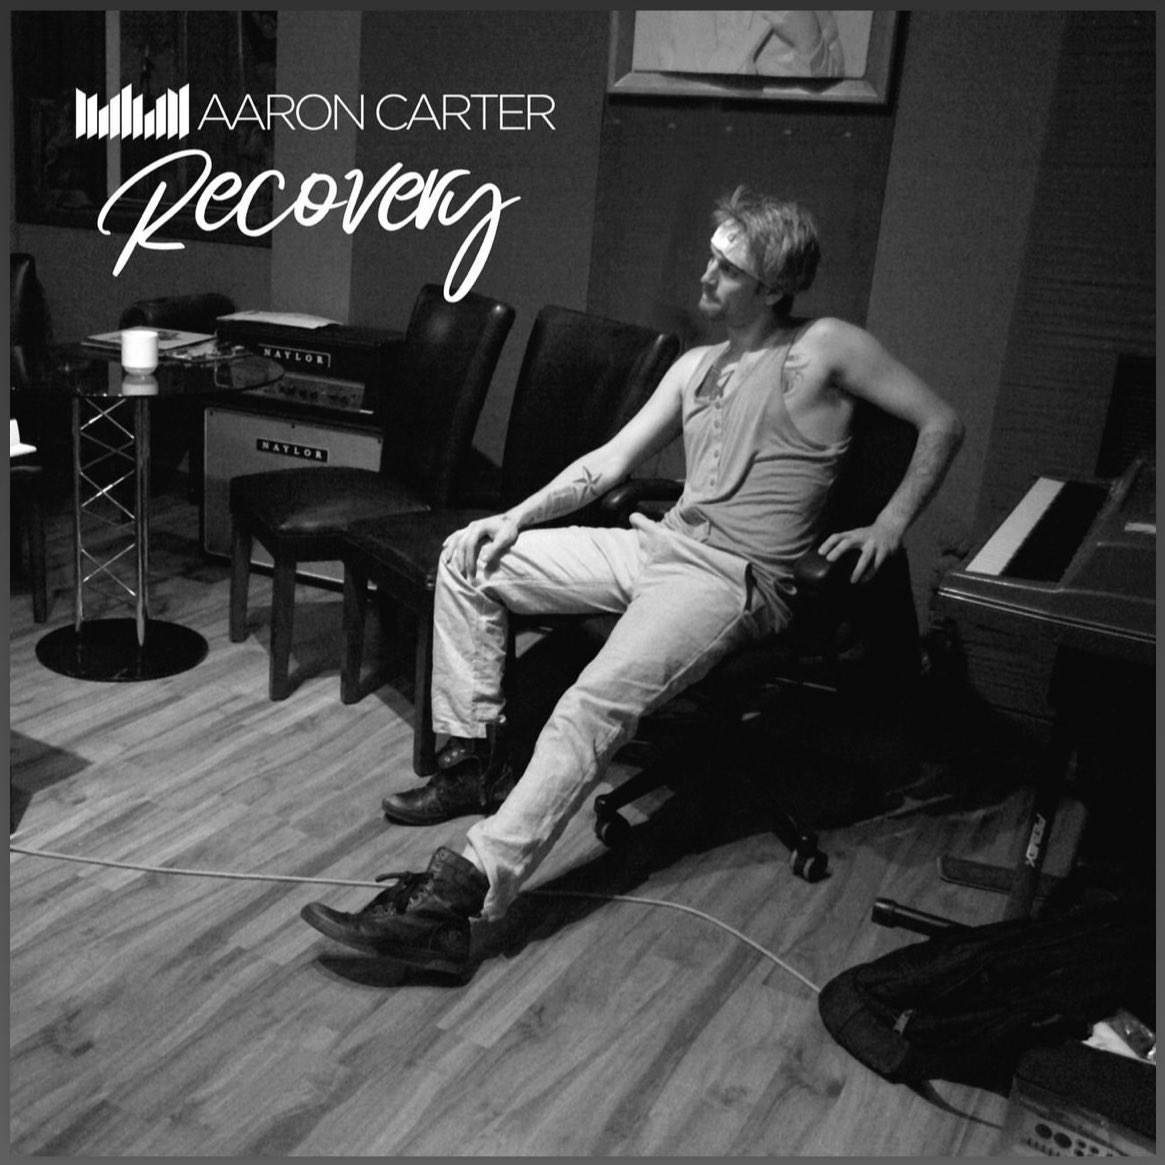 Coming this weekend, all weekend, worldwide. I Got You and Recovery streaming parties! Stay tuned. @nickcarter #nickcarter #IGOTYOU #recovery #aaroncarter